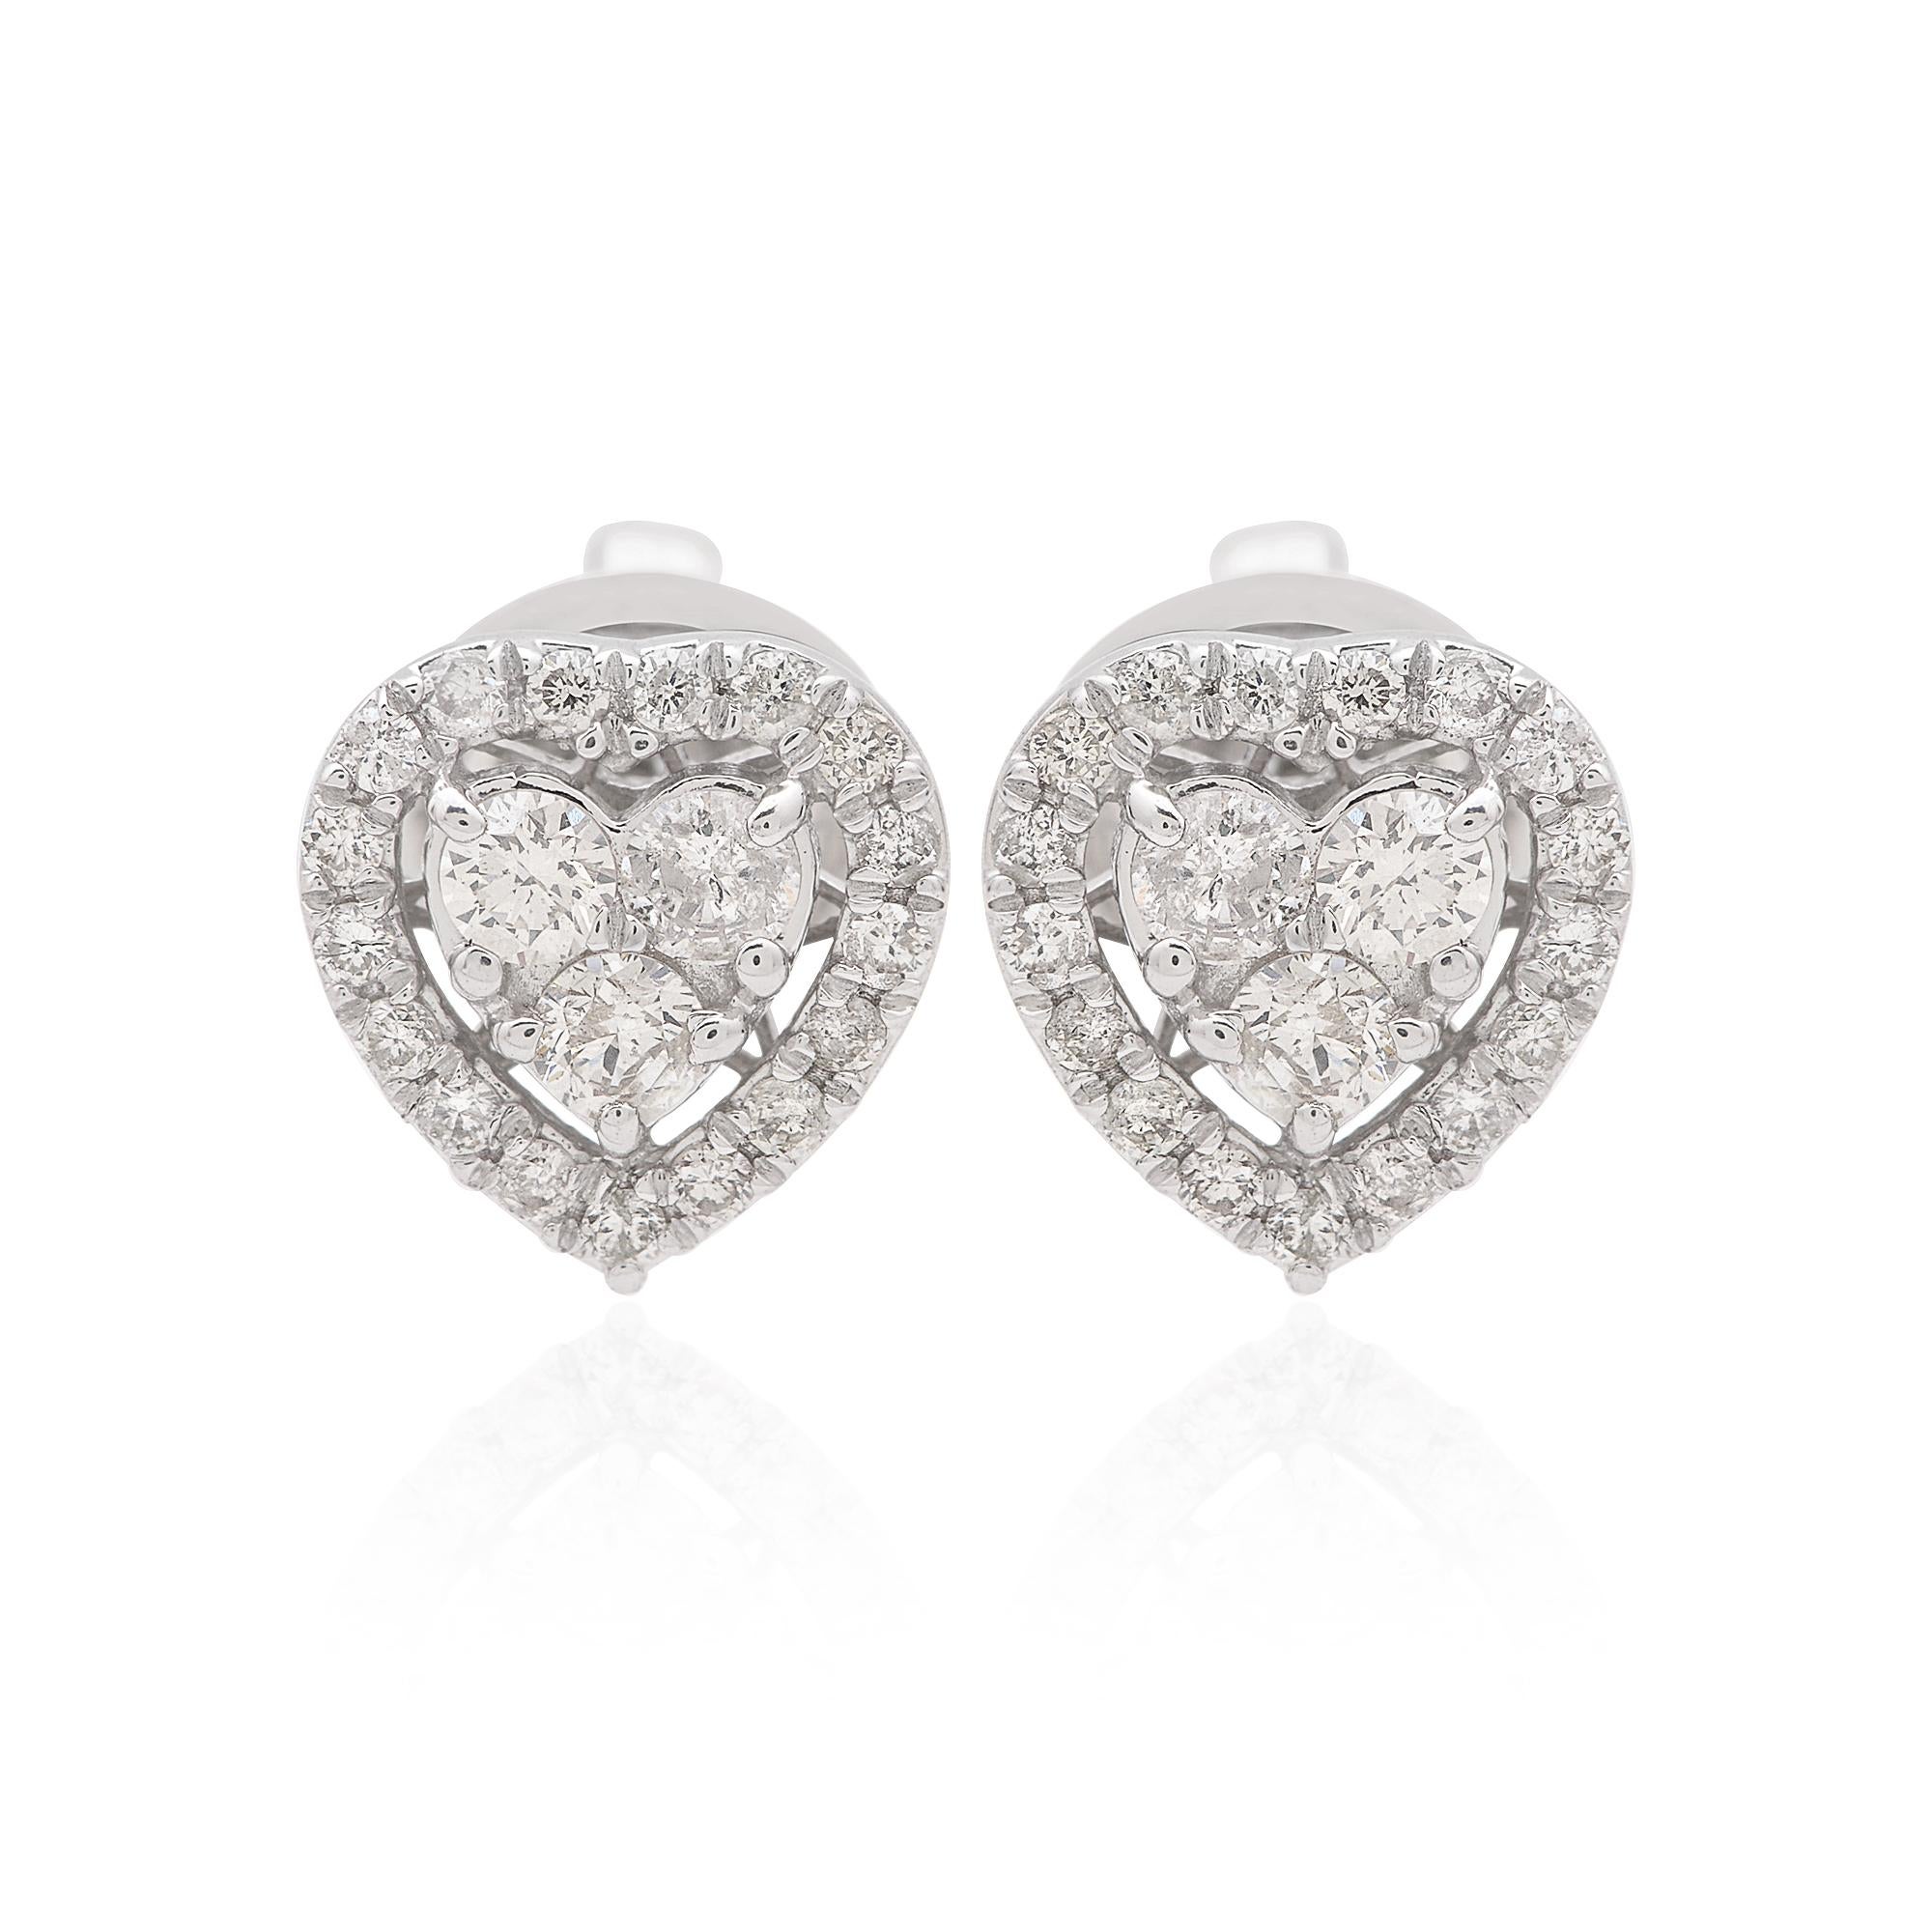 Each earring features a meticulously selected round diamond, totaling 0.55 carats for the pair, expertly set within a delicate heart-shaped setting. The brilliance and fire of these diamonds are accentuated by their pristine clarity and